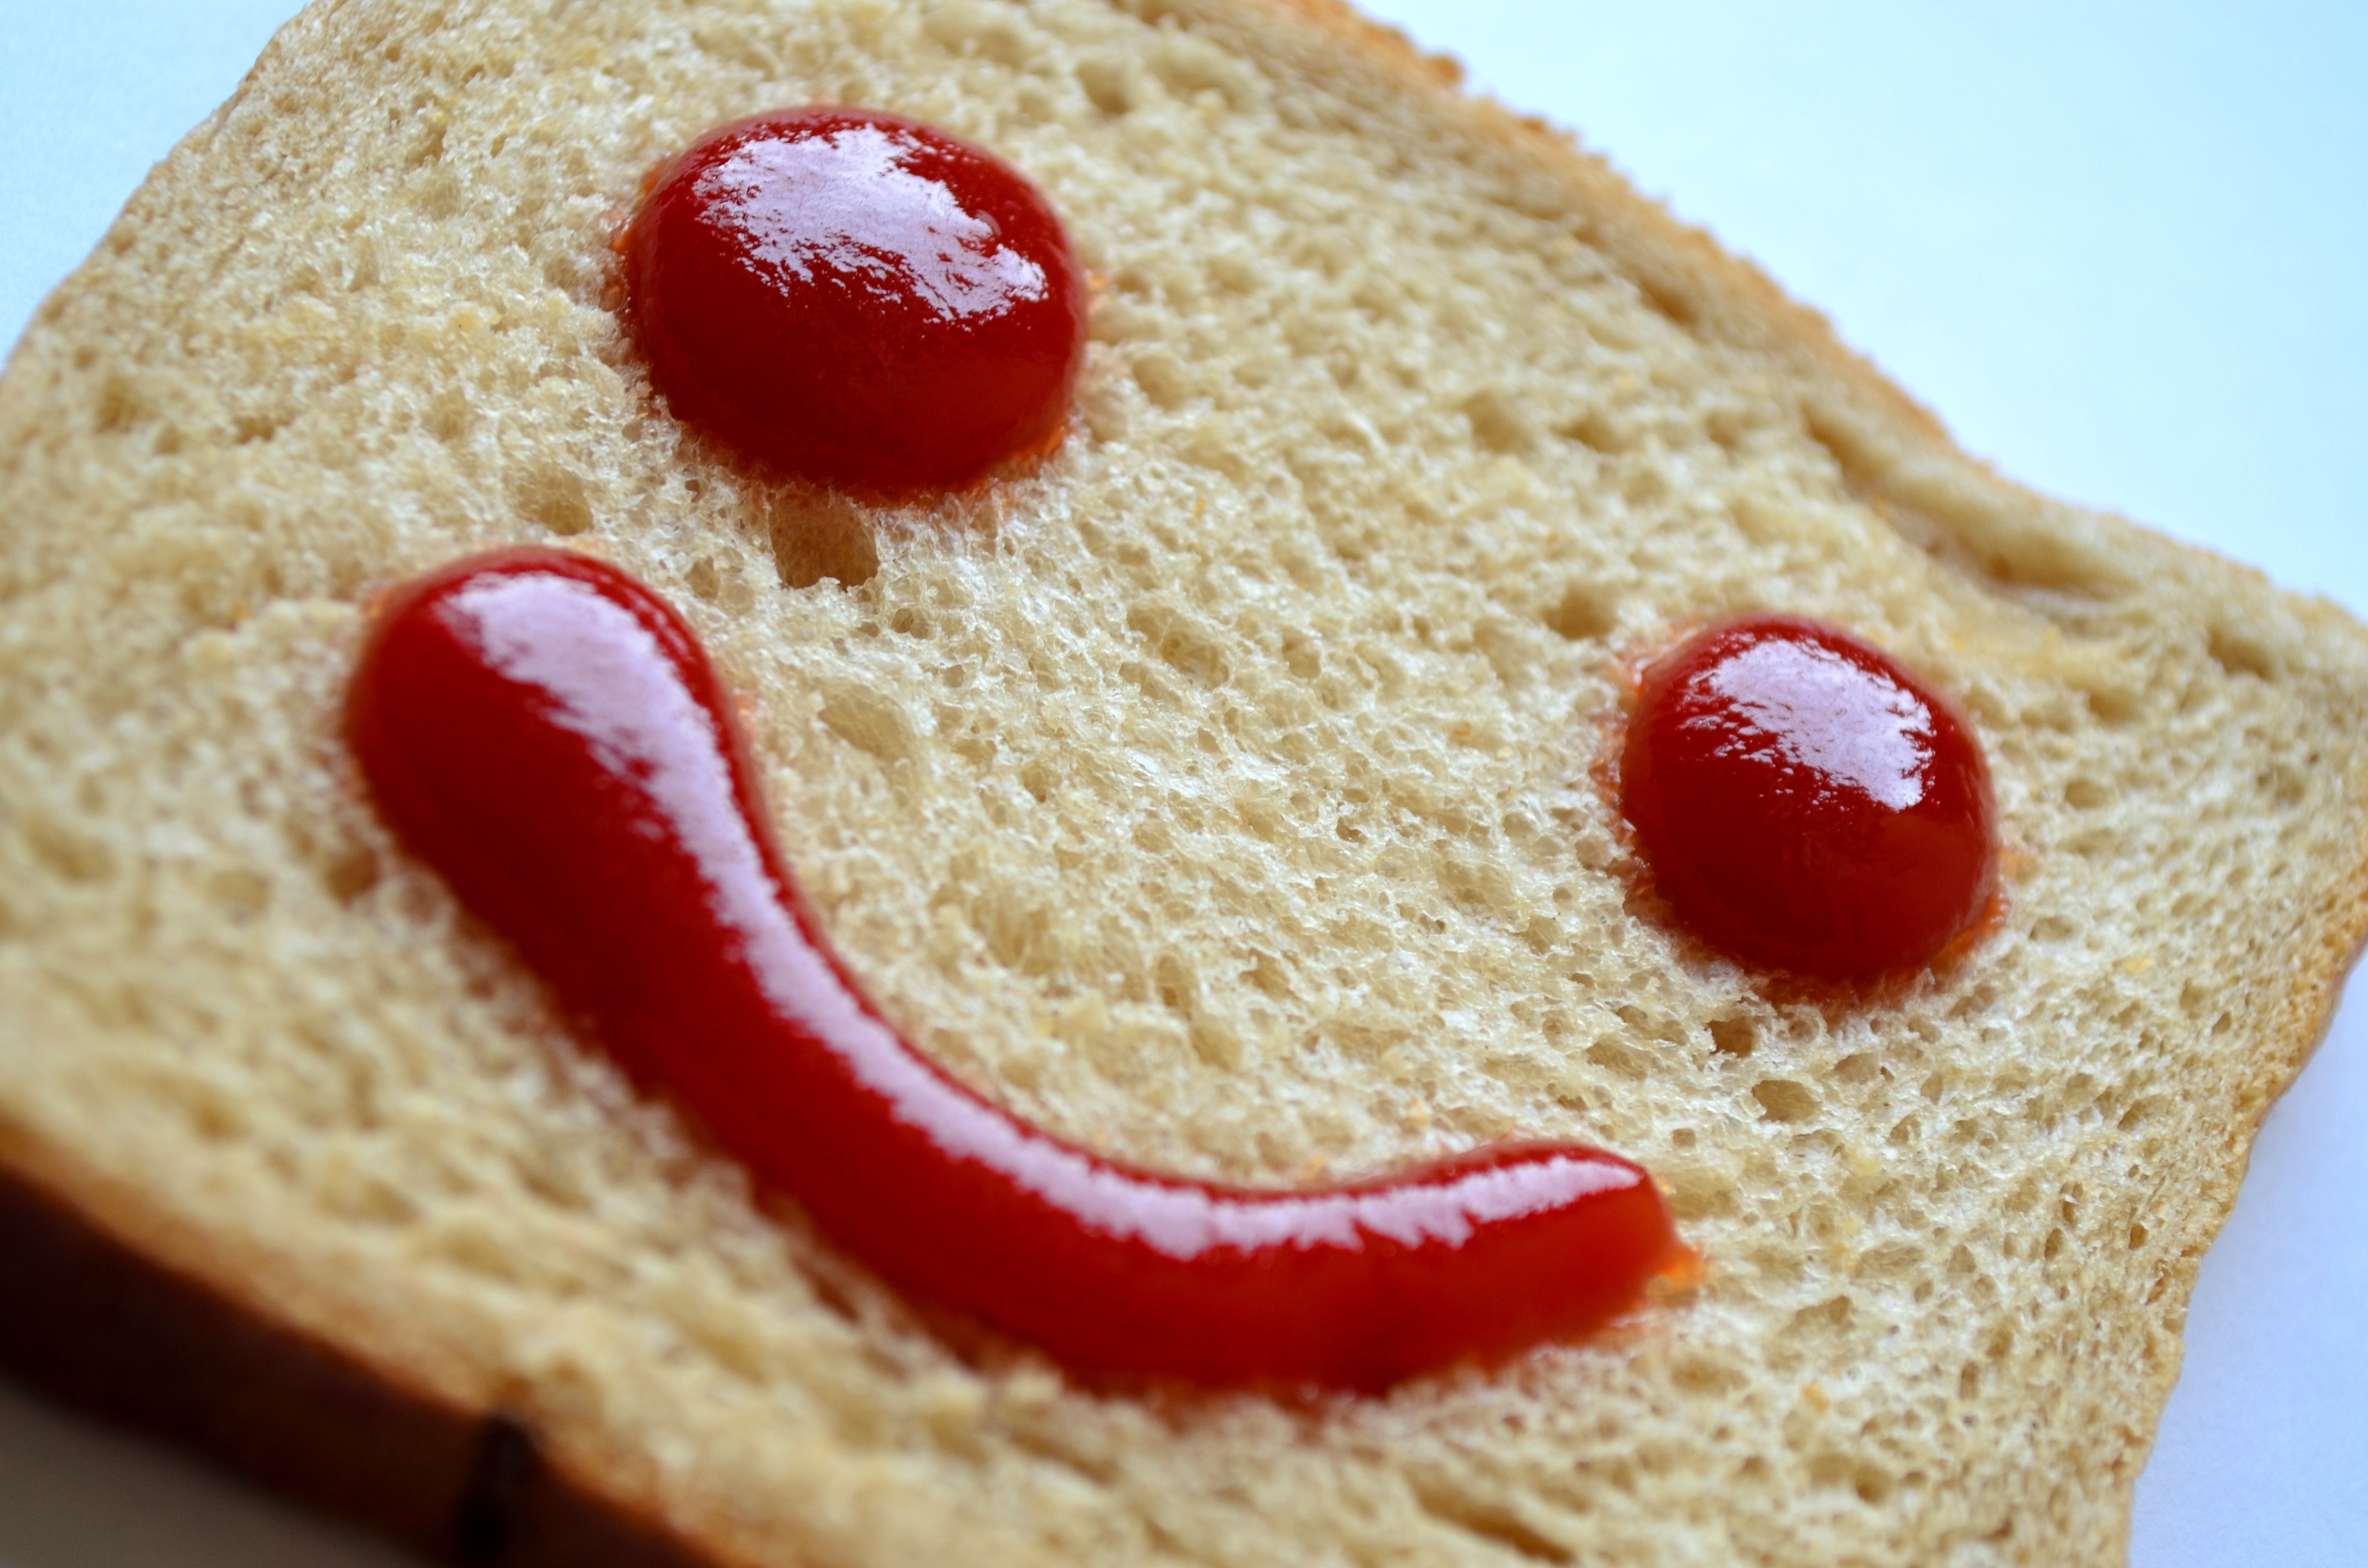 Face, Bread, Smiley, Ketchup, Red, Smile, red, food and drink